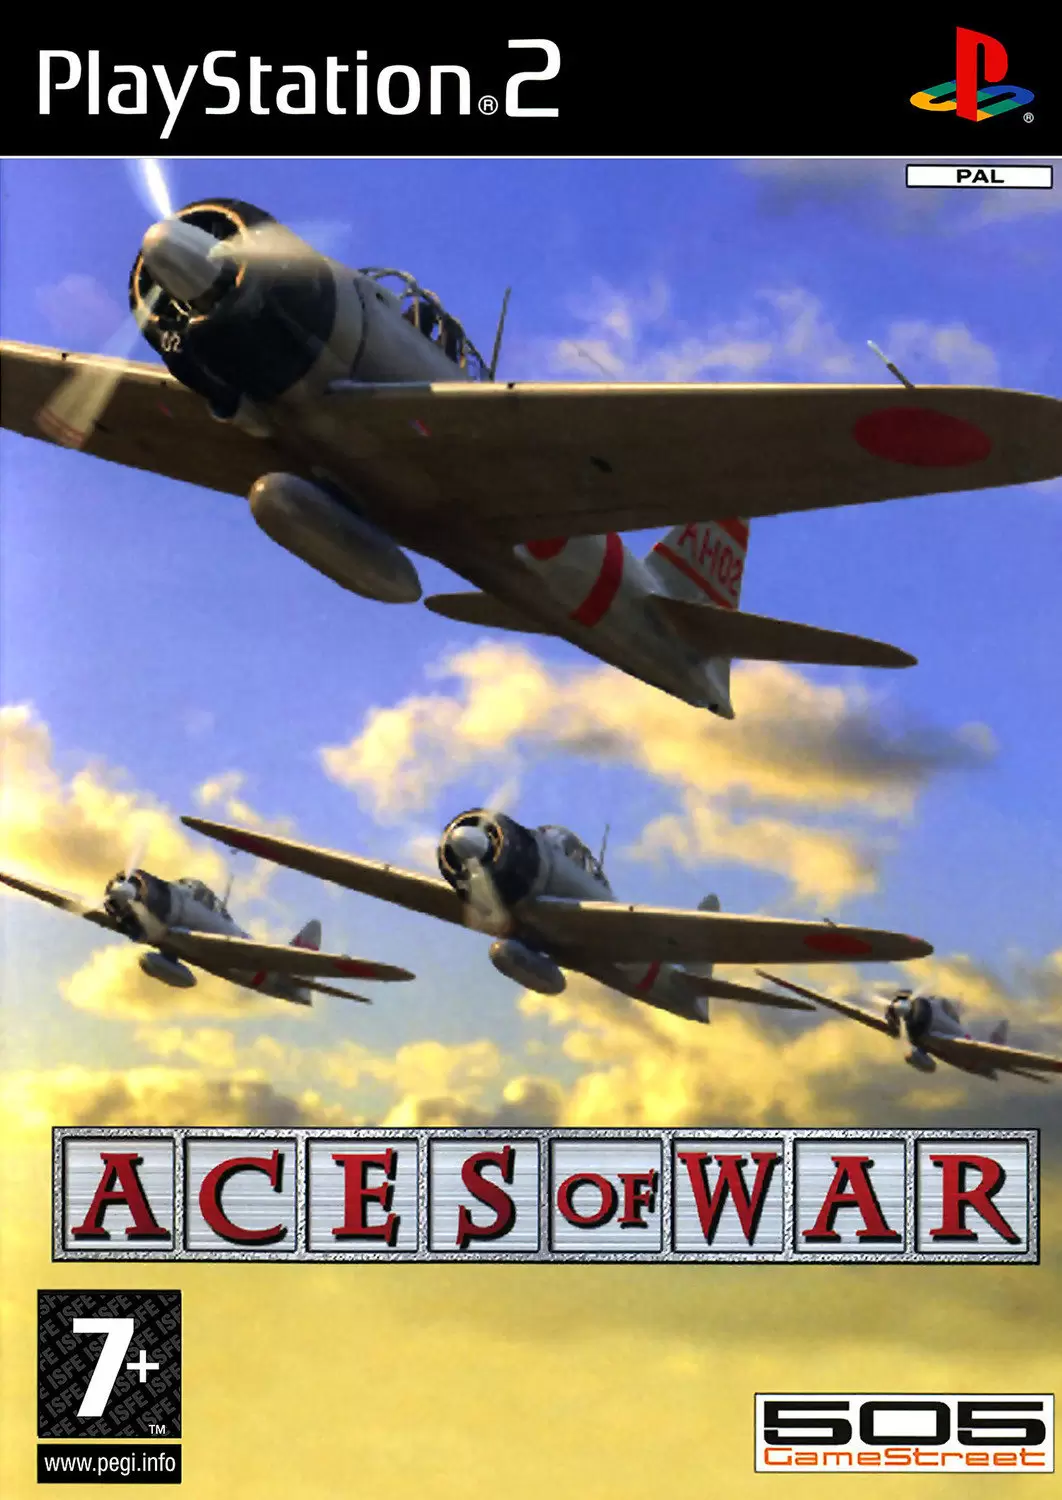 PS2 Games - Aces of War